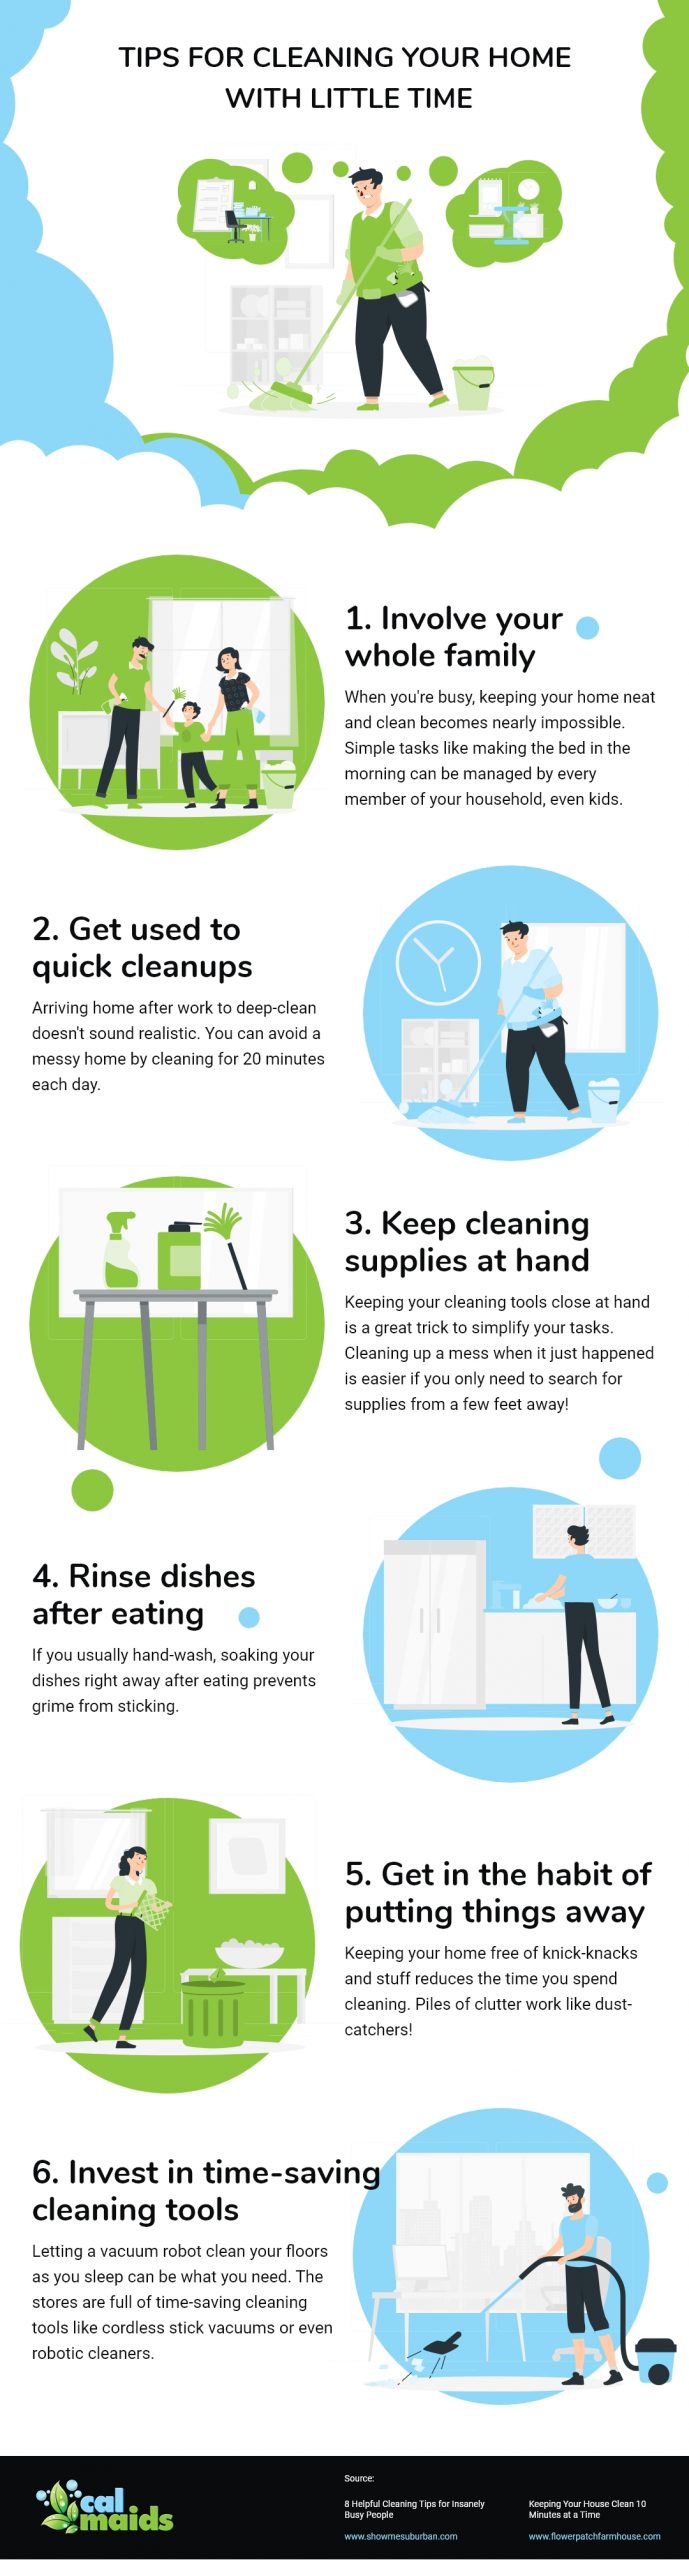 22 Little-Known Tips to {Really} Clean Your Home